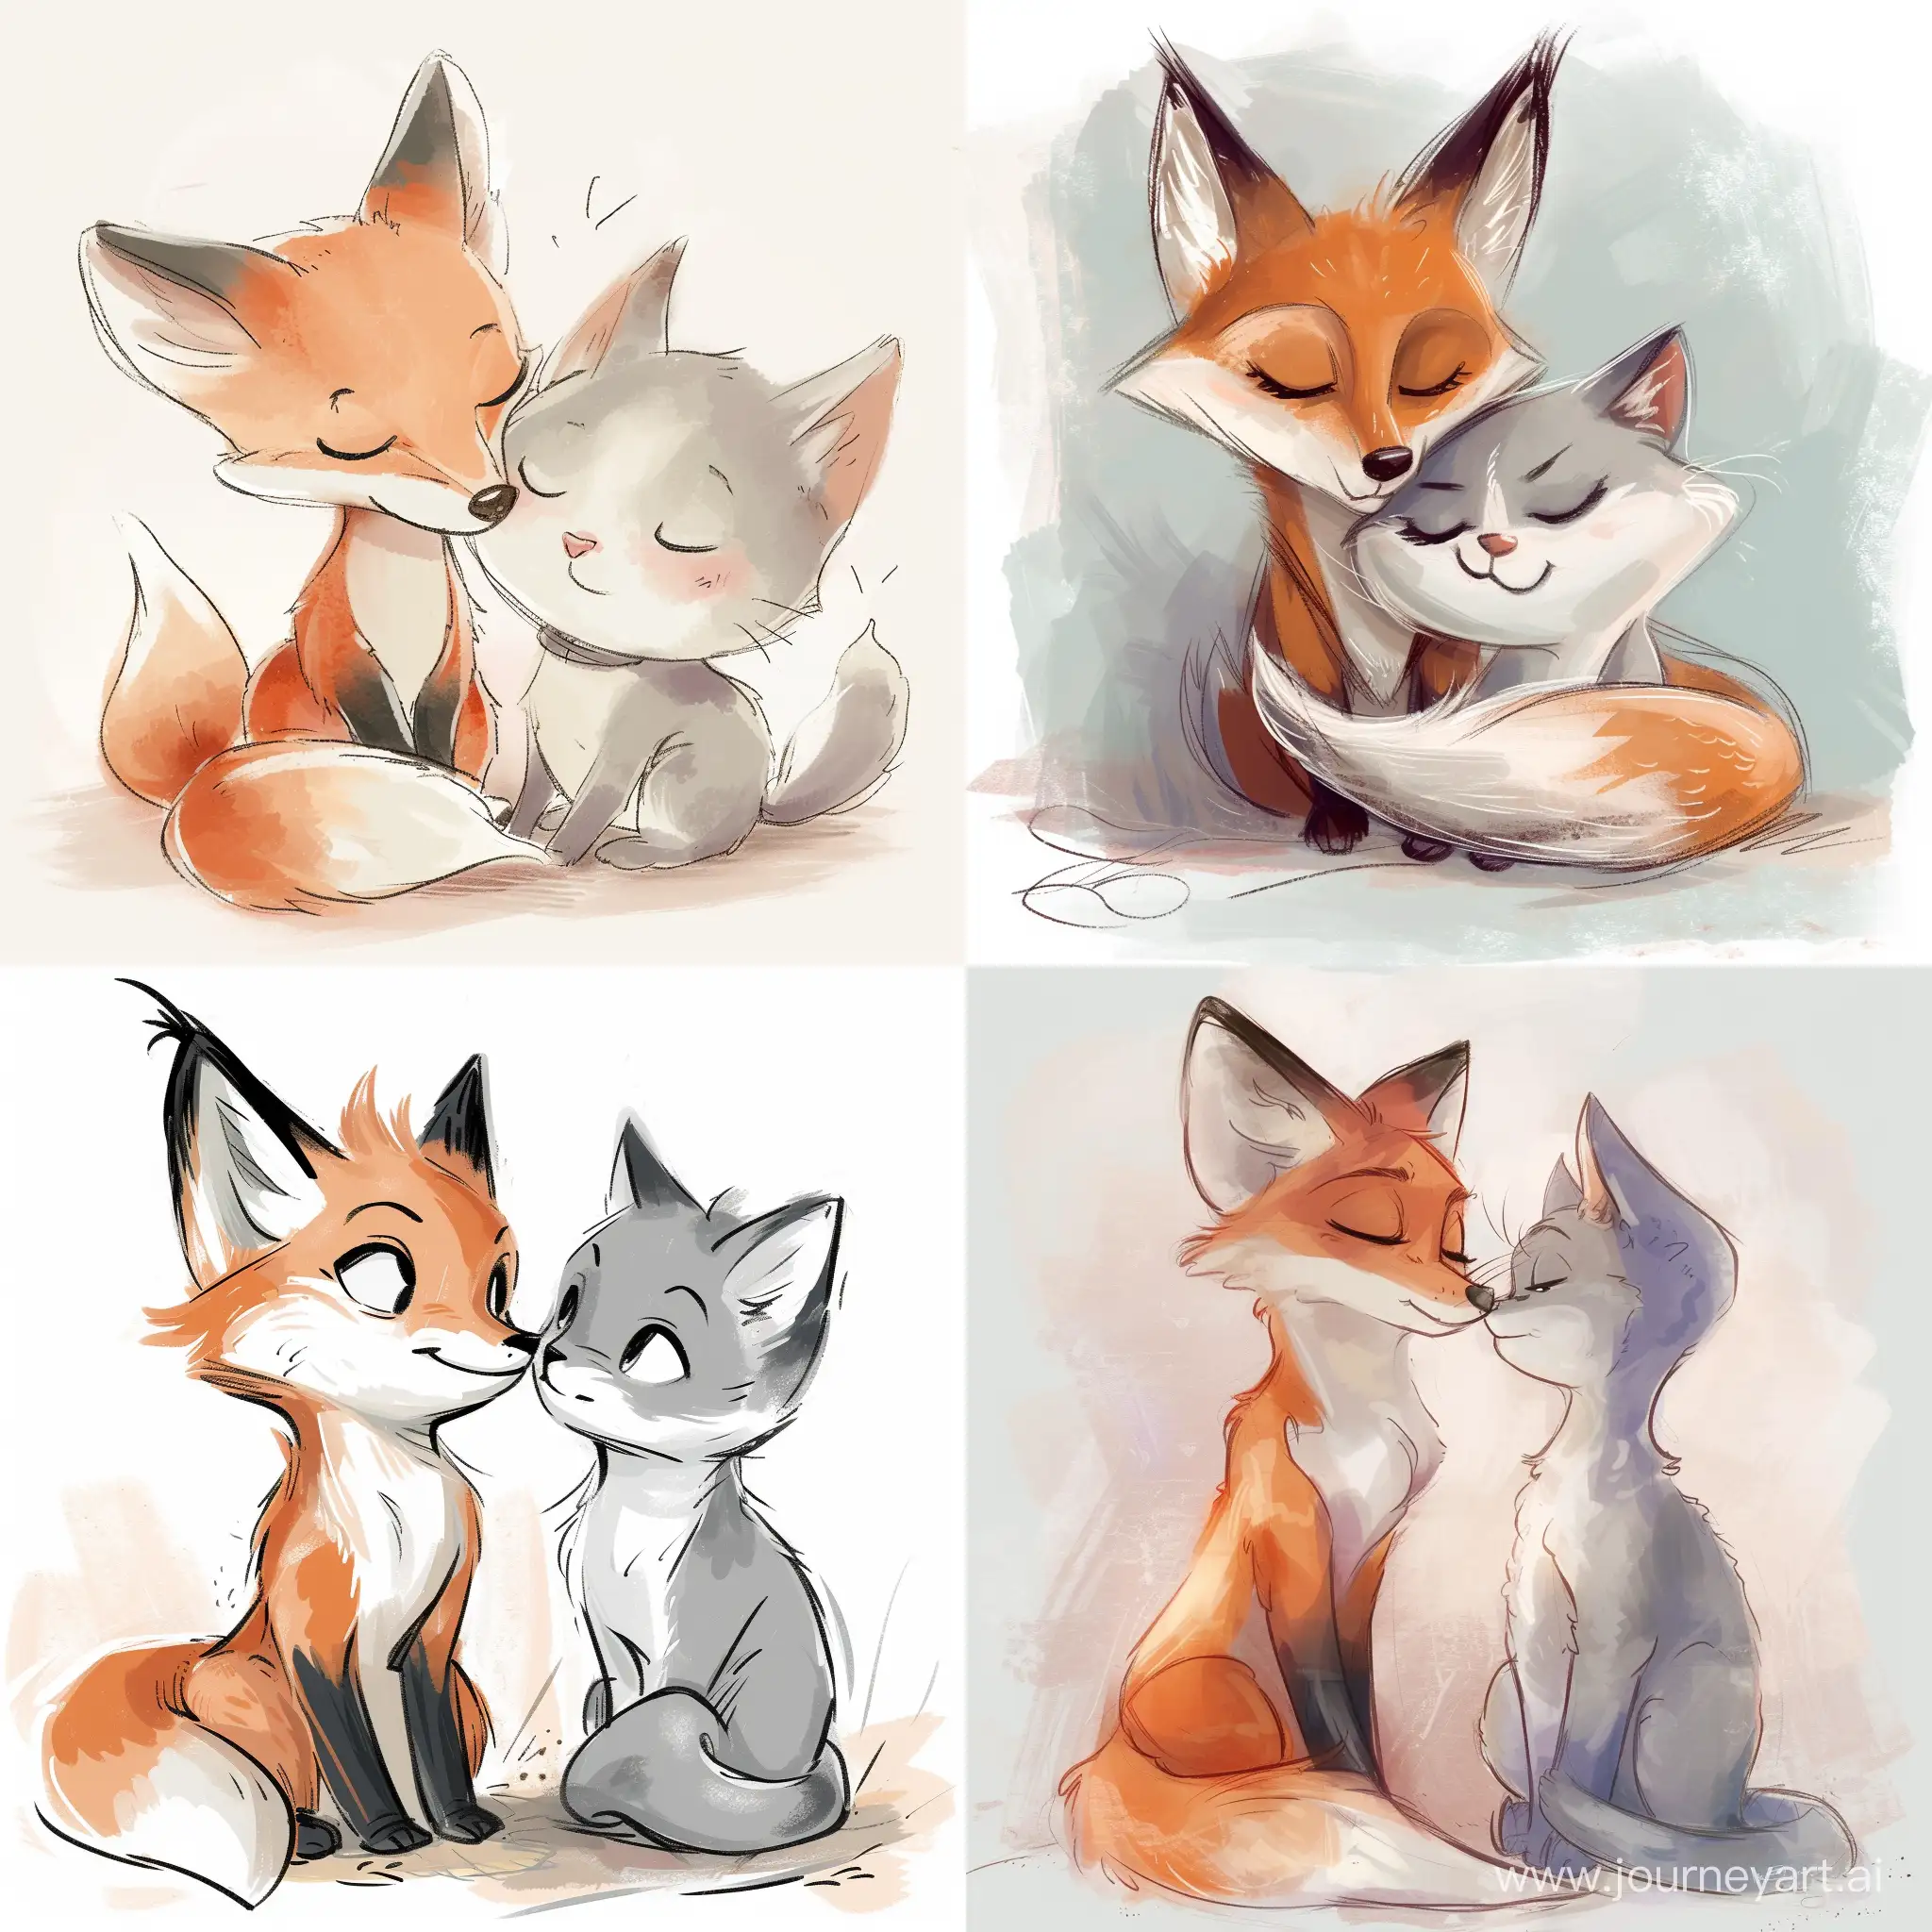 Adorable-Fox-and-Cat-Charming-Animal-Companionship-in-Art